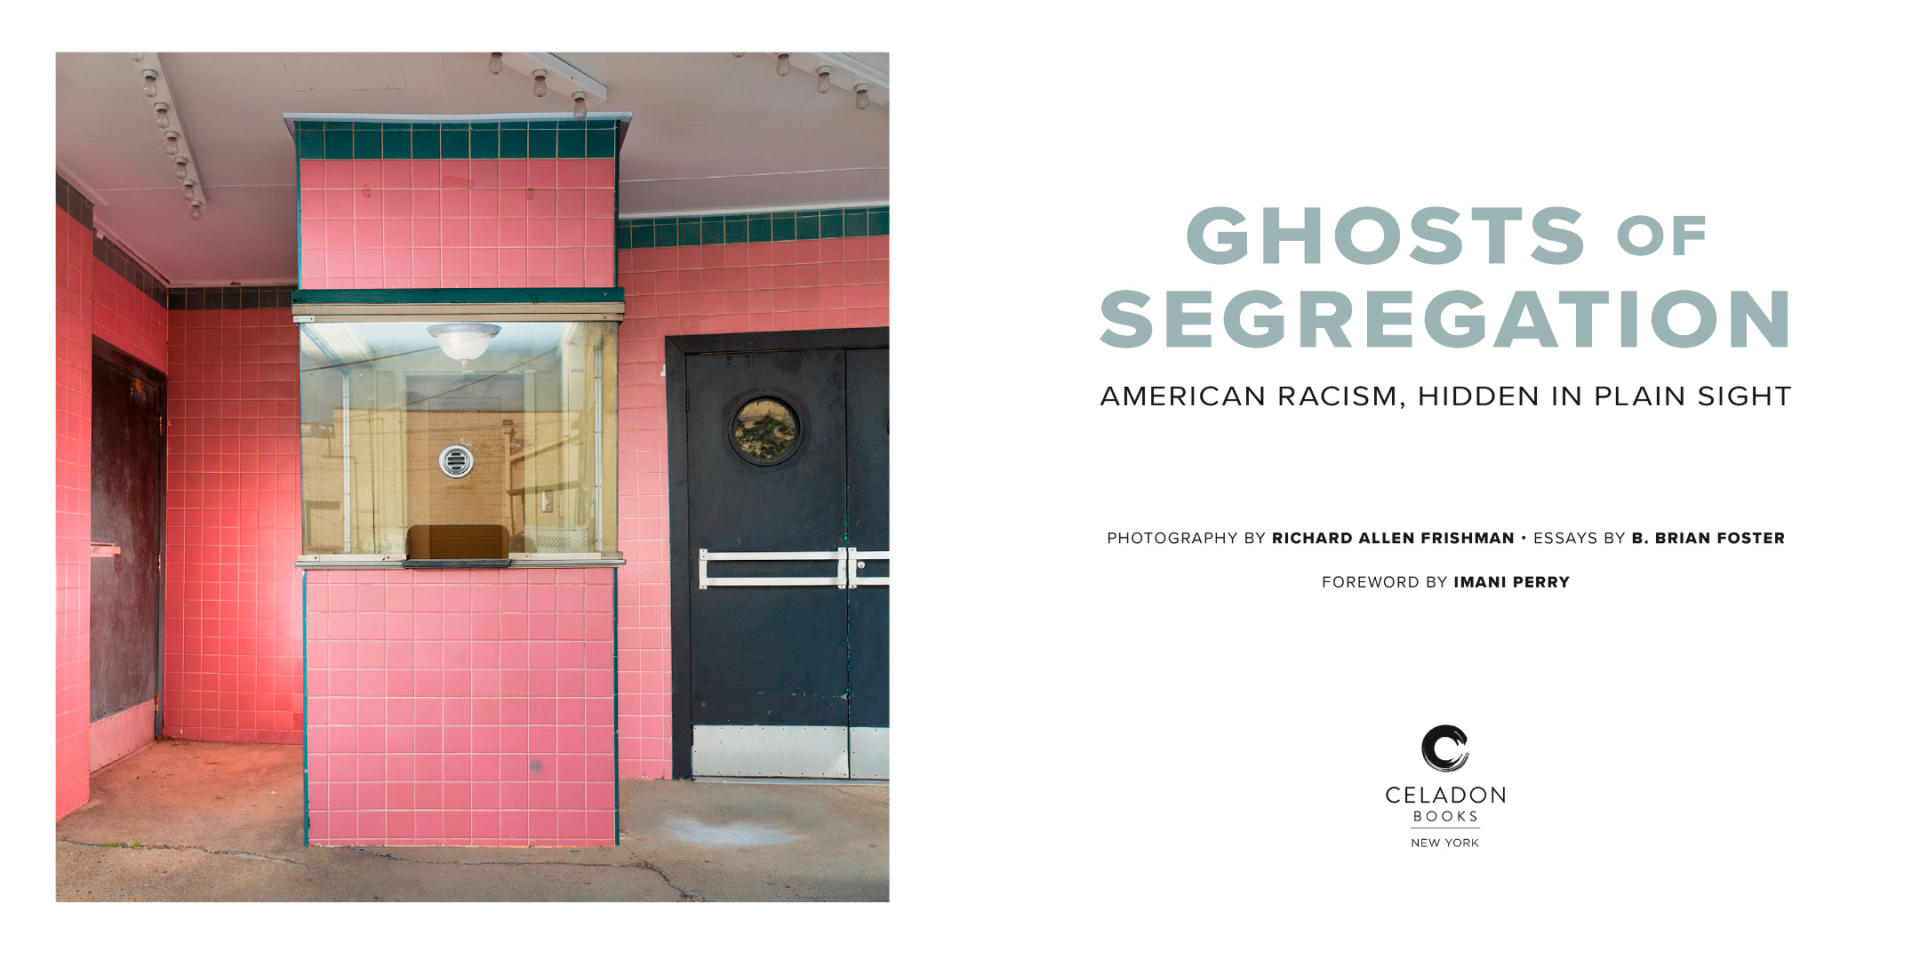  : THE BOOK : Ghosts of Segregation